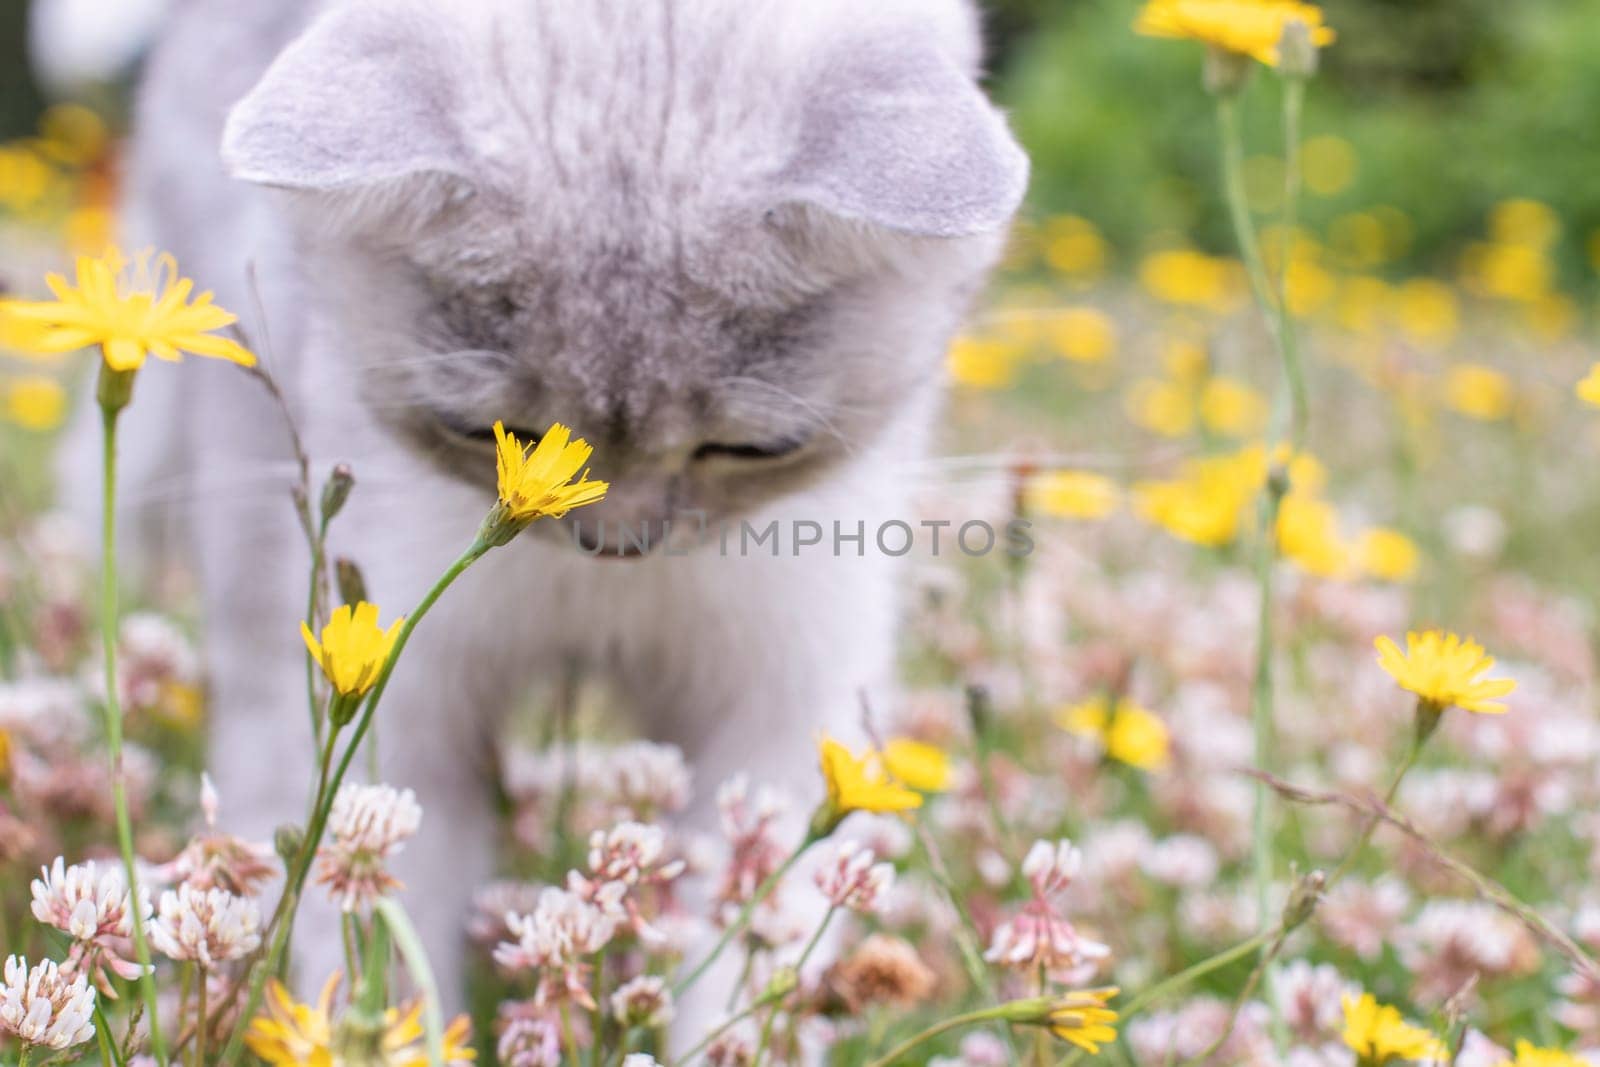 small white kitten sniffing flowers on a green summer lawn, looking with curiosity at something in the grass by KaterinaDalemans